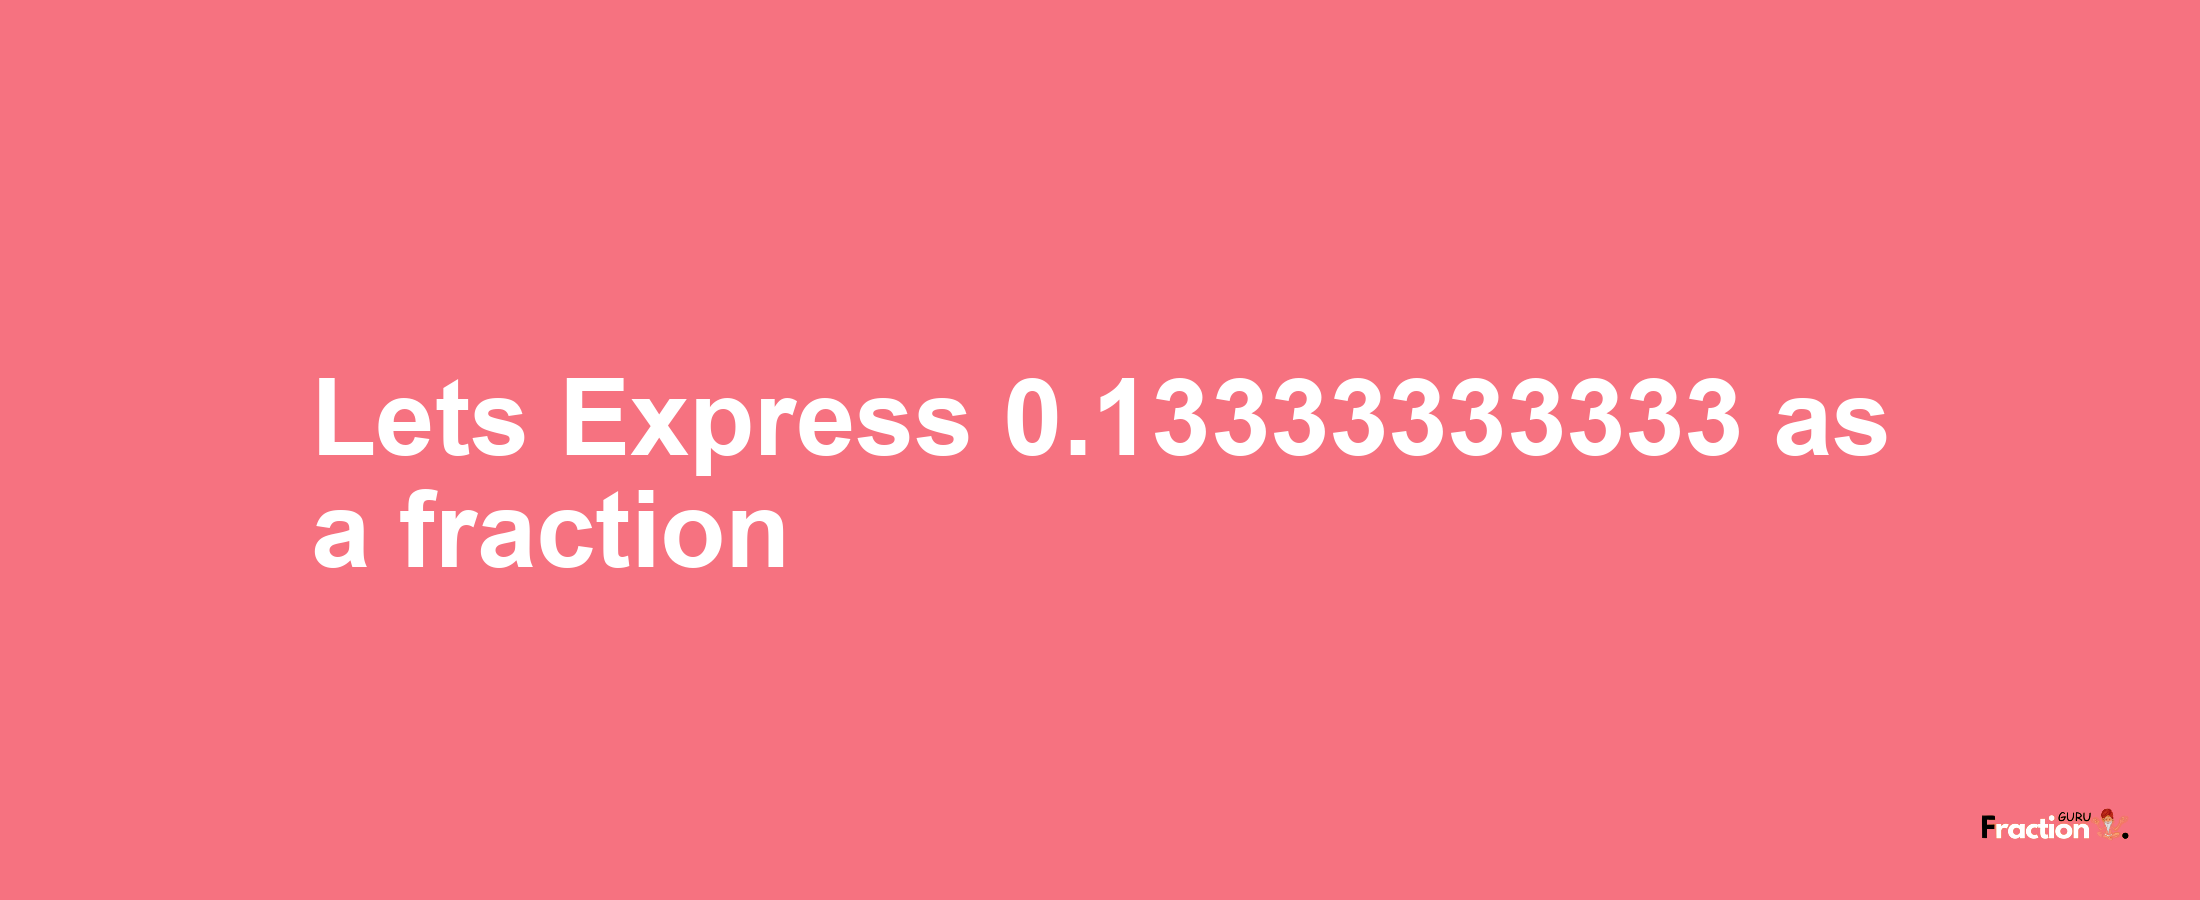 Lets Express 0.13333333333 as afraction